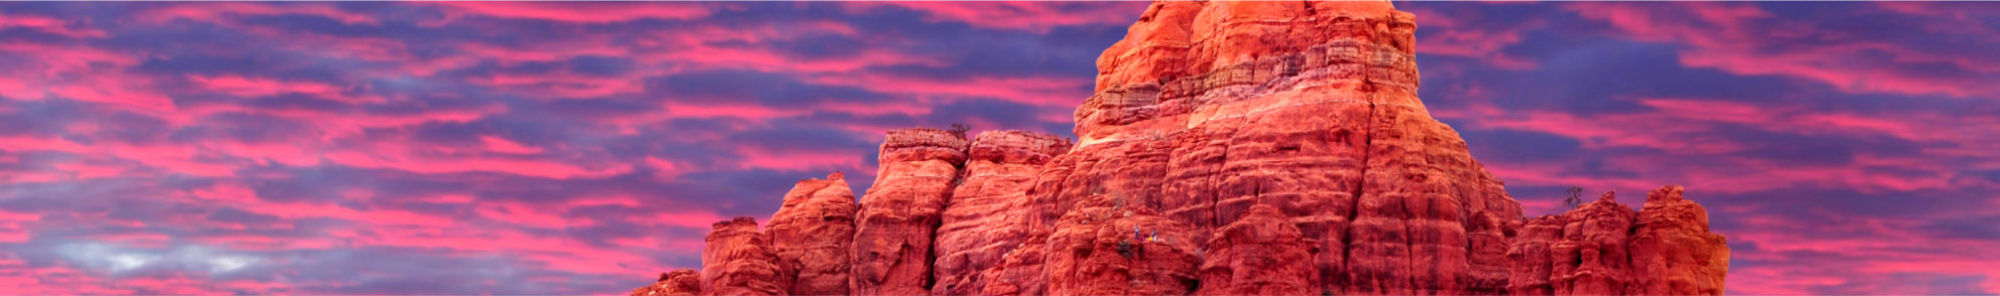 rock formation in front of pink and purple sky